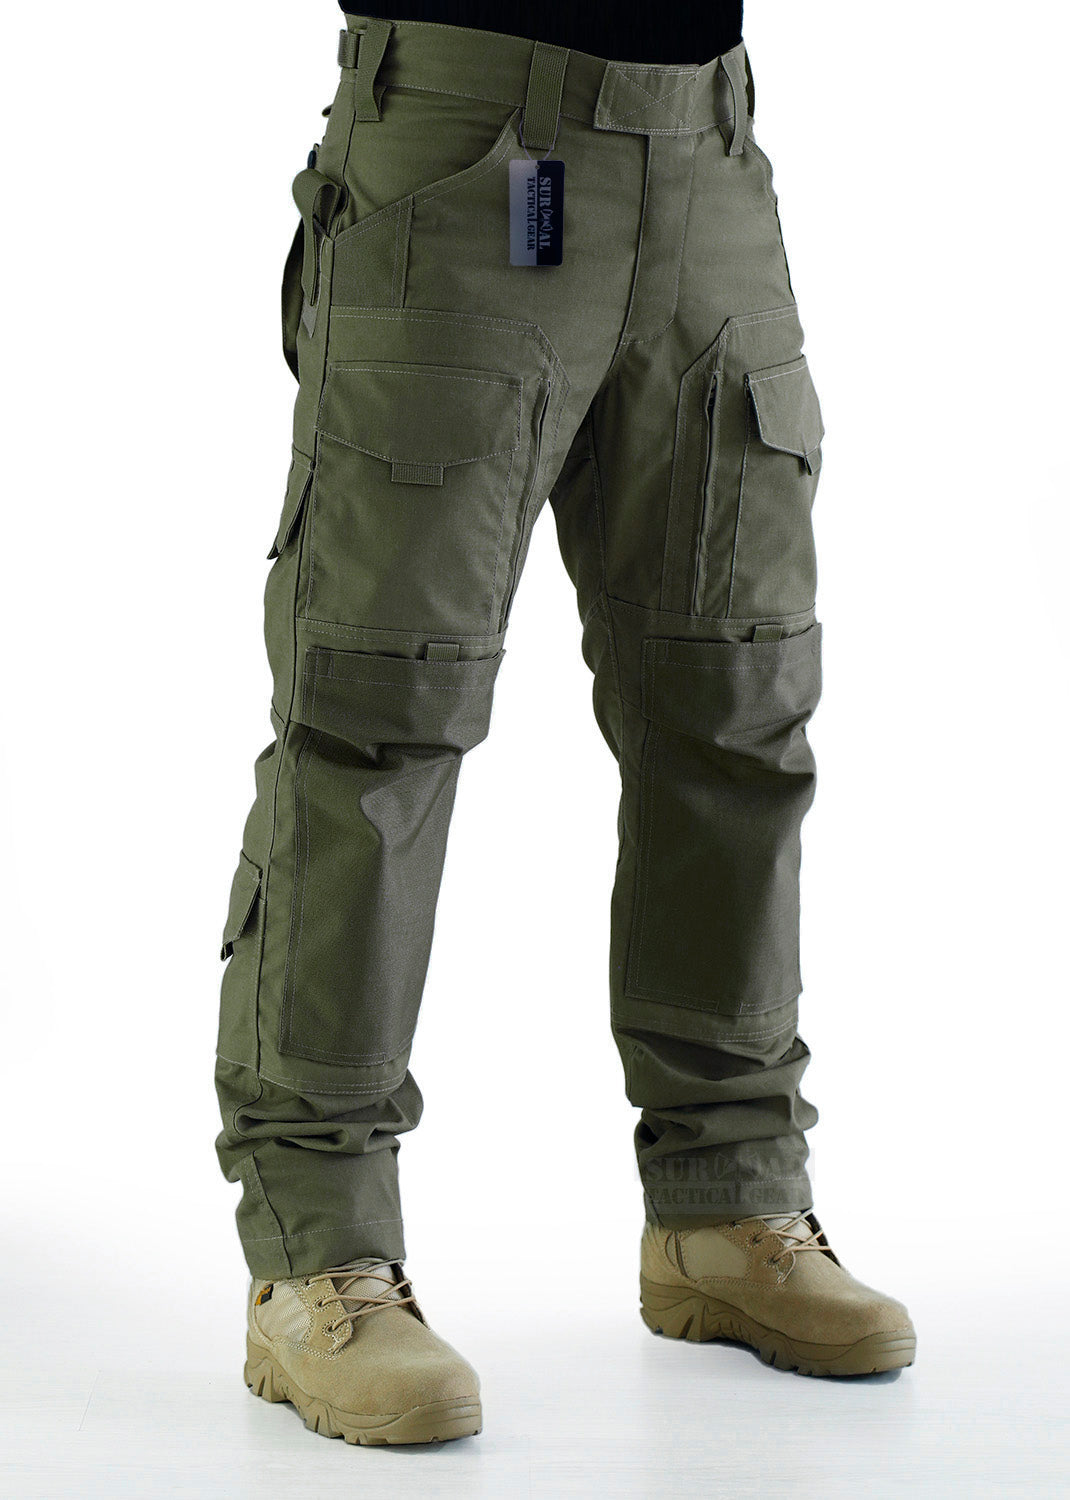 Wholesale Men Camouflage Pants Combat Cargo Pants Outdoor Male Tactical Camo  Climbing Camping Hiking Pants Plus Size From m.alibaba.com